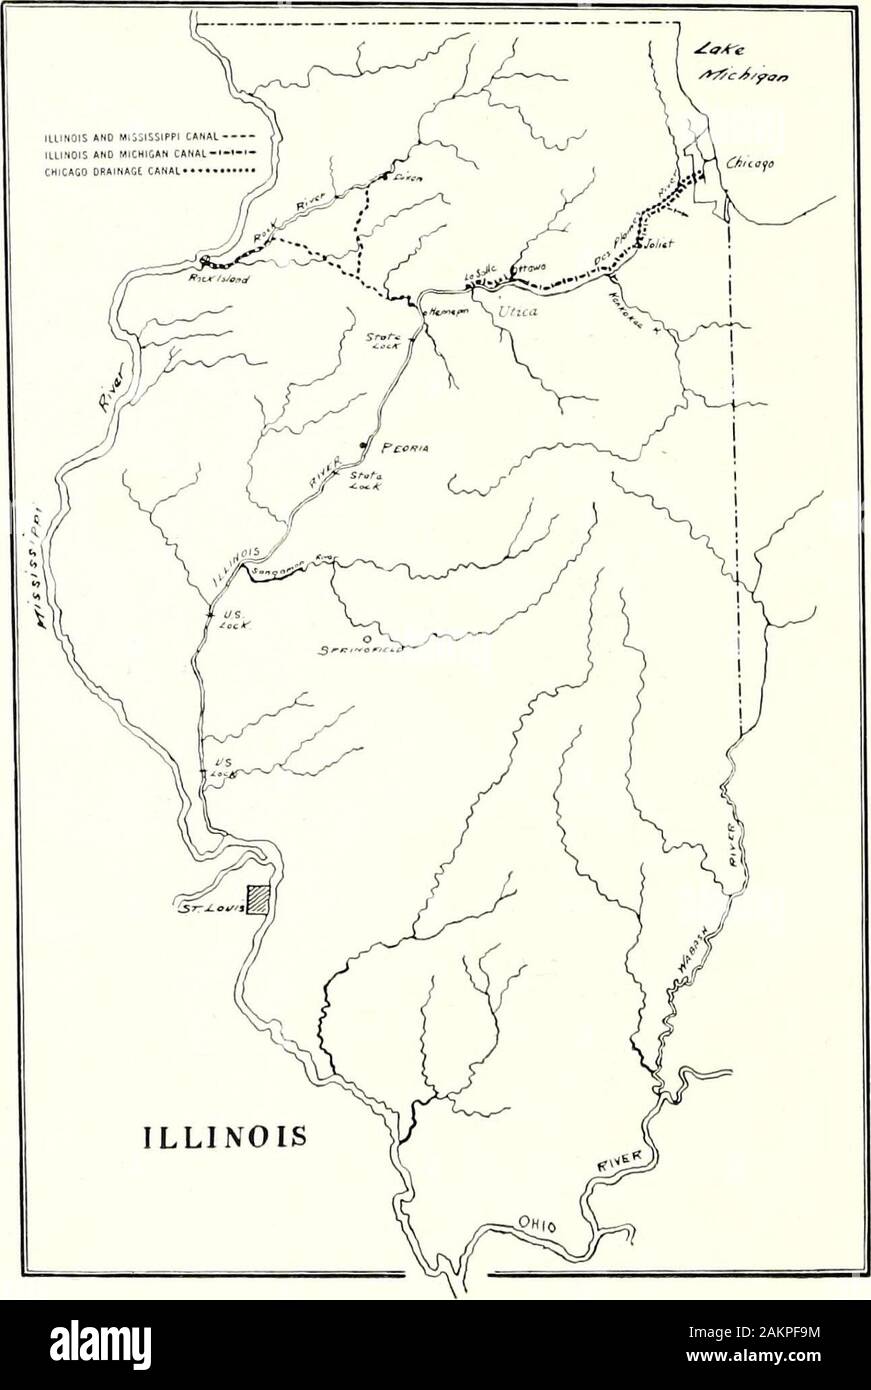 The Illinois and Michigan Canal : a study in economic history . 35, 37, 45- .Wheat prices, 23; received at St. Louis, 102; shipped, 84, 101 et seq., (1842-47) 99, (1866-67) 112, (1905) 85, 114.Whiteside, Gen., 47.Width of Canal. See Dimensions.Wild-cat currency, 64, 72.Wilson, Gen. James H., 137; plan for enlarging canal, 135 et seq.Winter navigation of I. & M., 22.Winter rates. See Freight rates, Winter.Wisconsin River, 154.Wisner, Geo. Y., Estimate of channel improvements, 140.Woodward, A. B., favors waterway from St. Lawrence to Gulf of Mexico, 6.Wool shipped, 1842-47, 99.Wright, Benjamin, Stock Photo